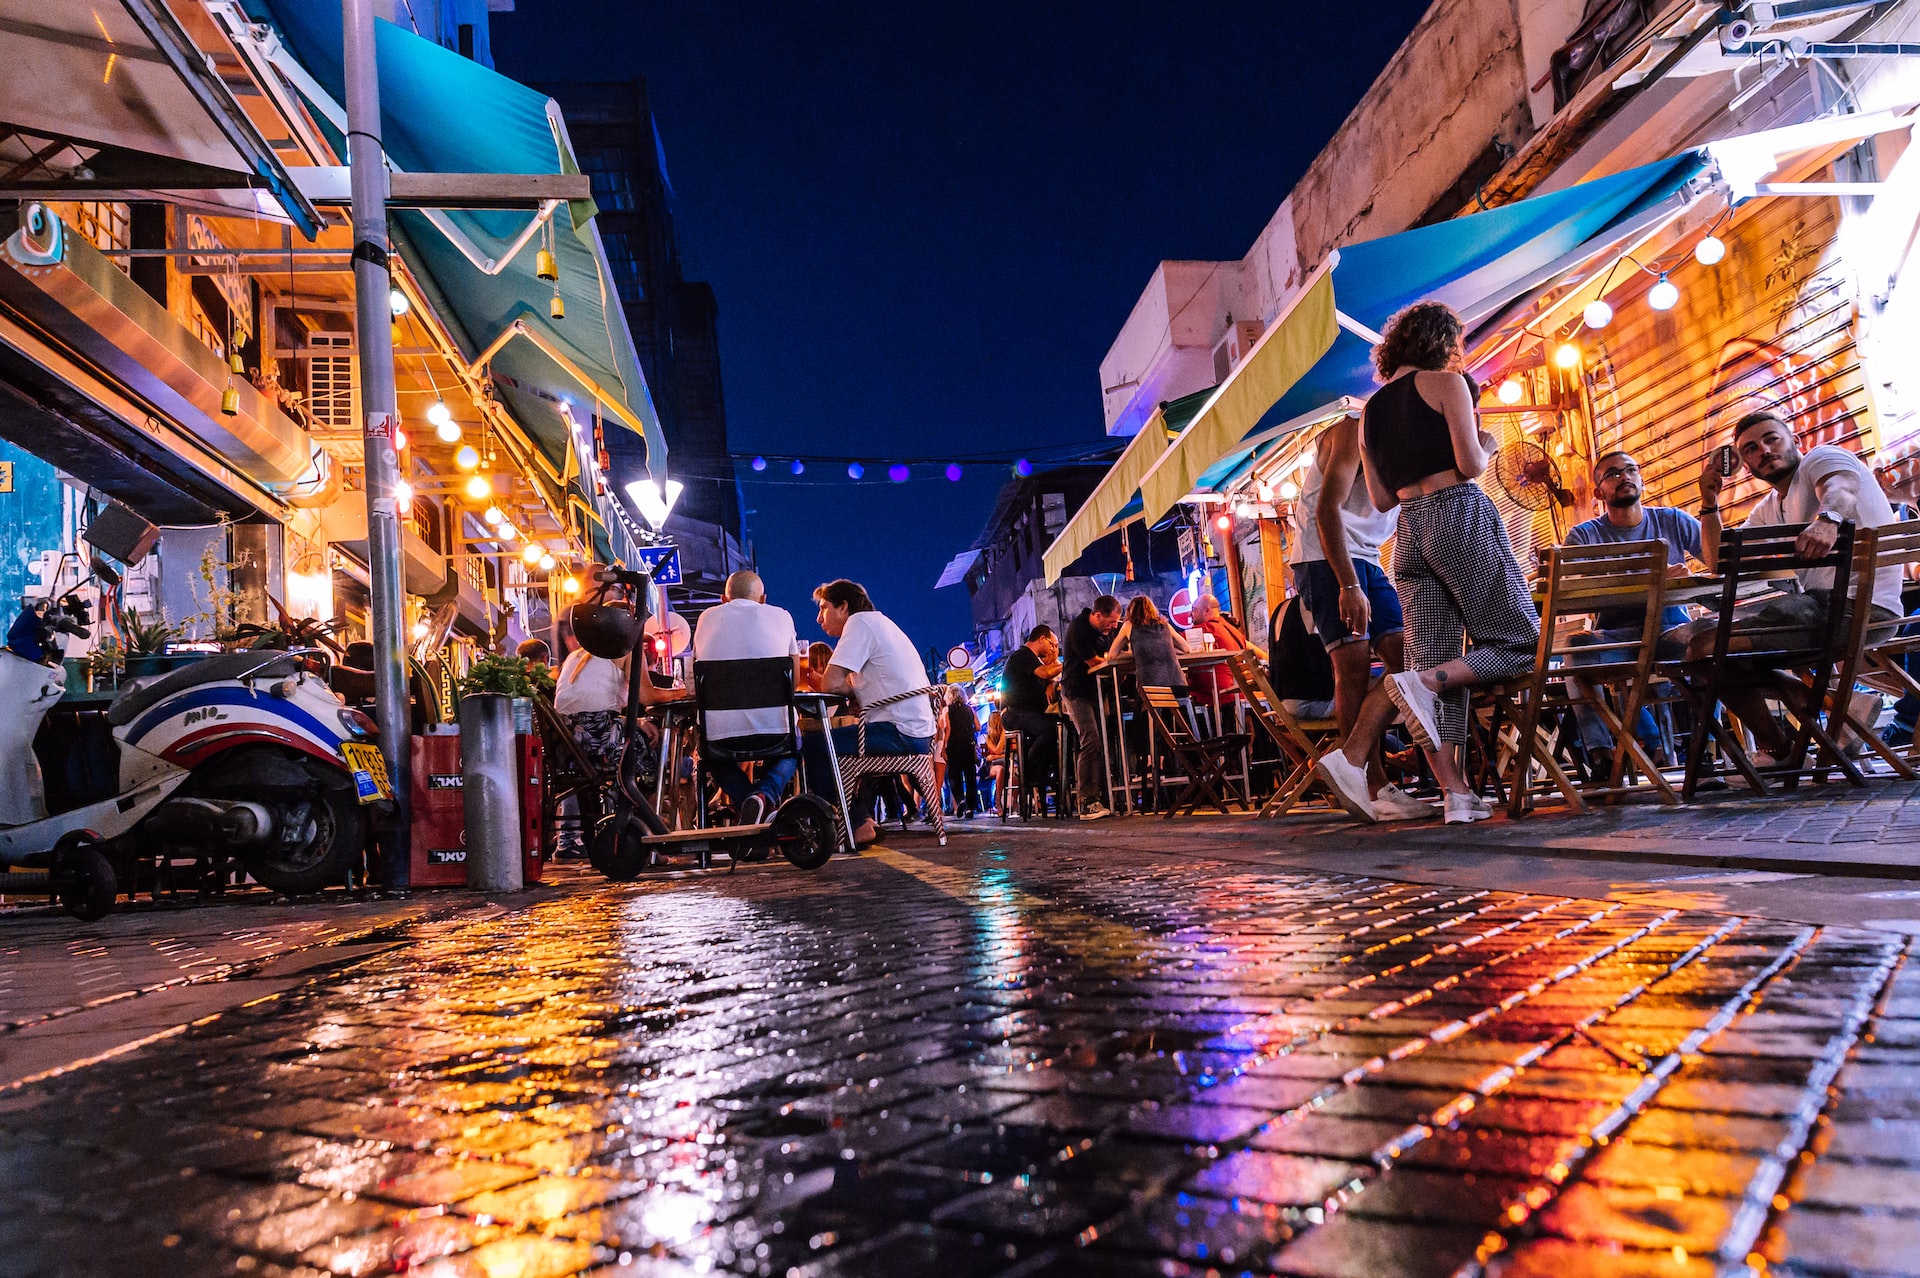 People eating at a restaurant in the street in Tel Aviv